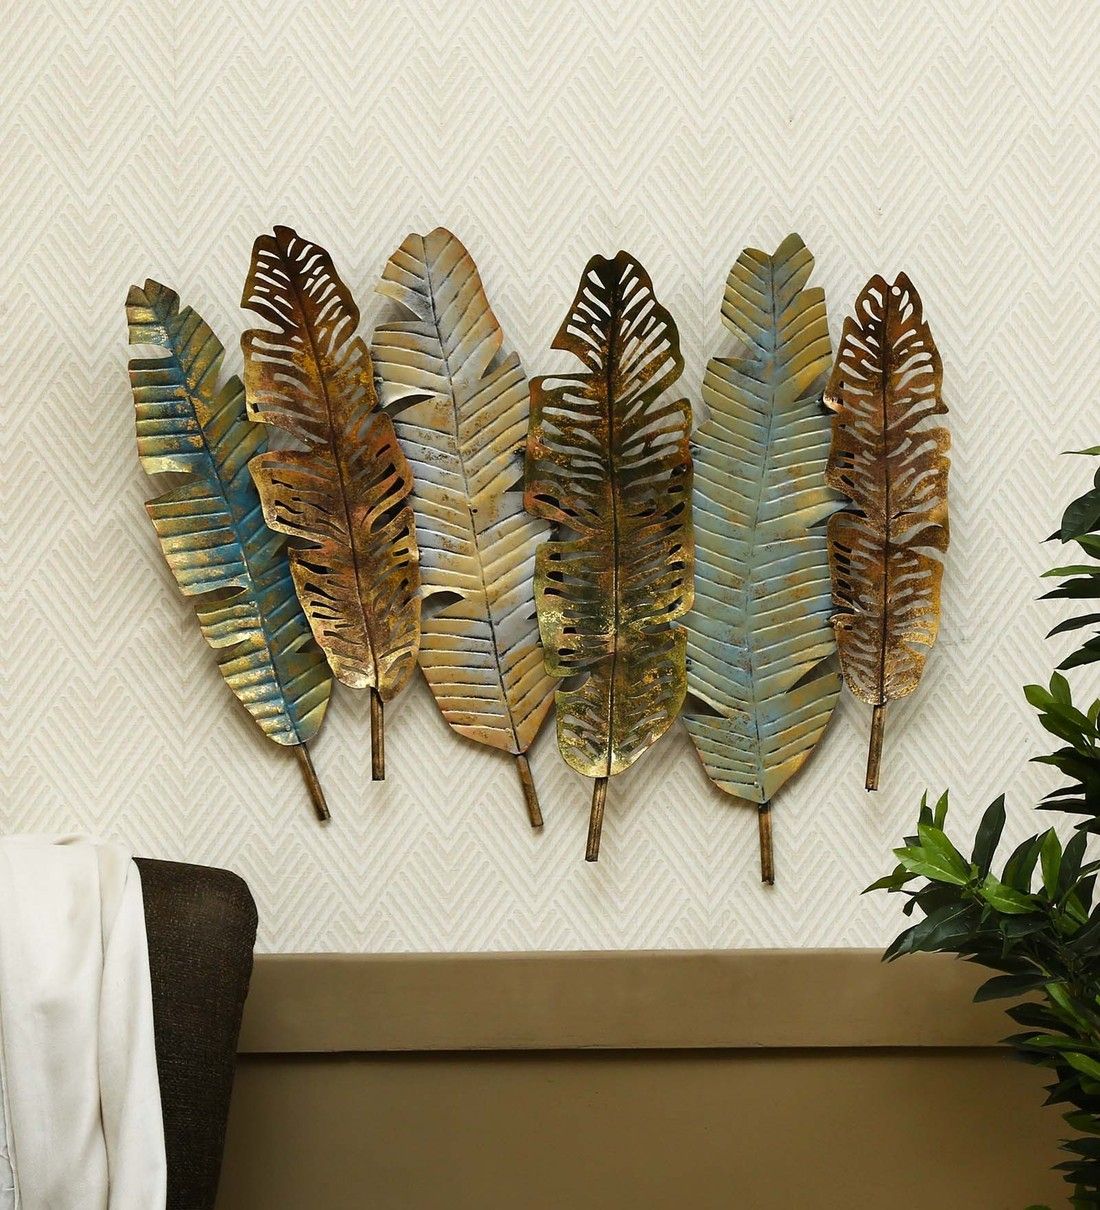 Buy Gold Metal Antique Leaf  Wall Artmalik Design Online – Floral Within Most Current Pierced Metal Leaf Wall Art (View 7 of 20)